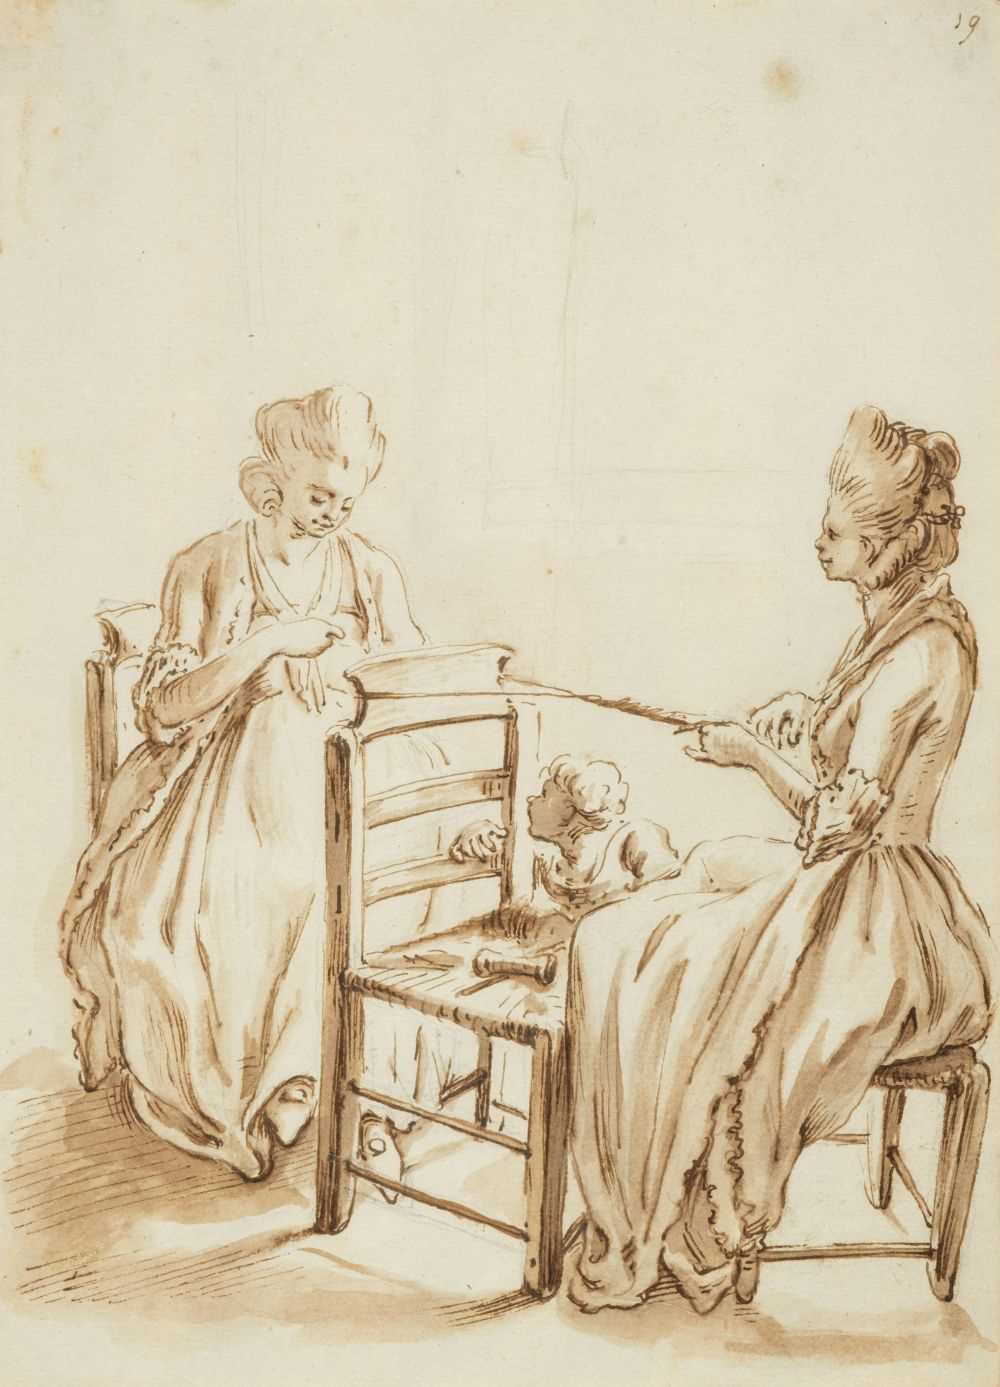 Lot 305 - Andriessen (Anthonie, 1746-1813). Two ladies seated with a young child looking on